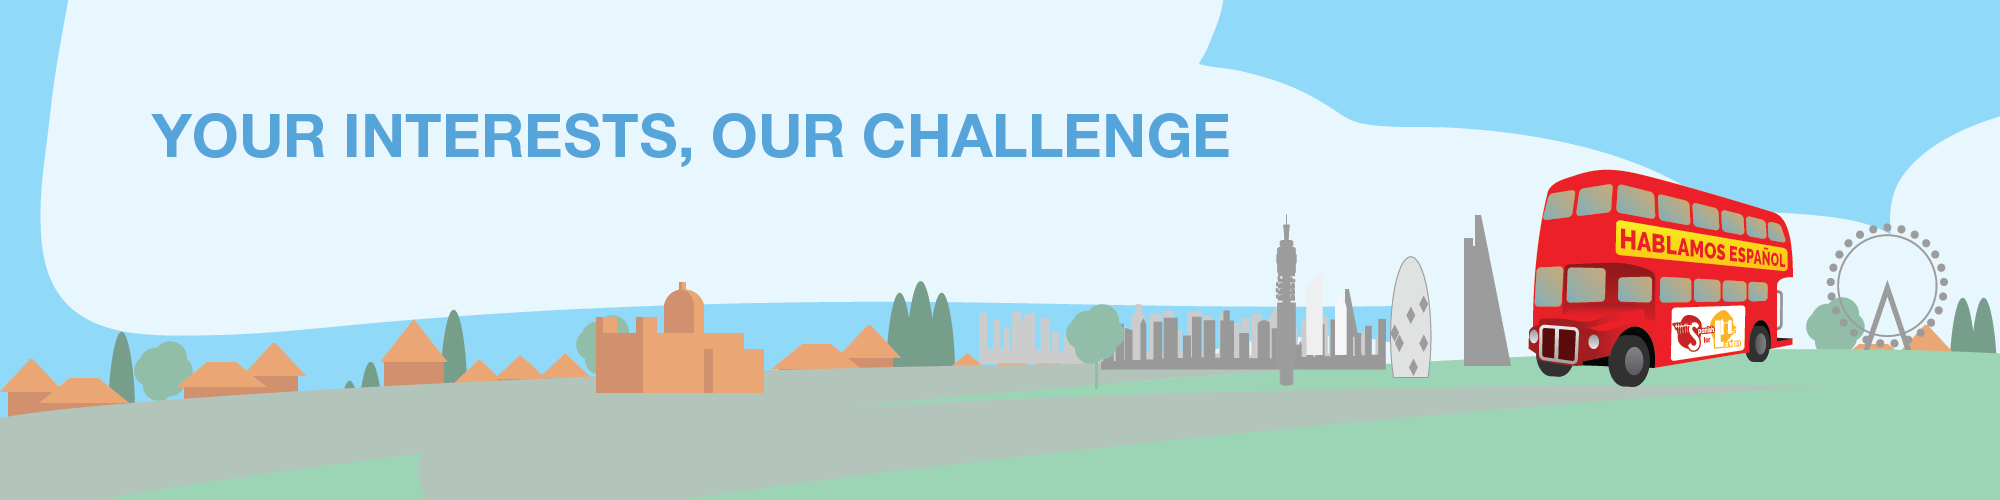 Your Interests, Our Challenge - Spanish for London